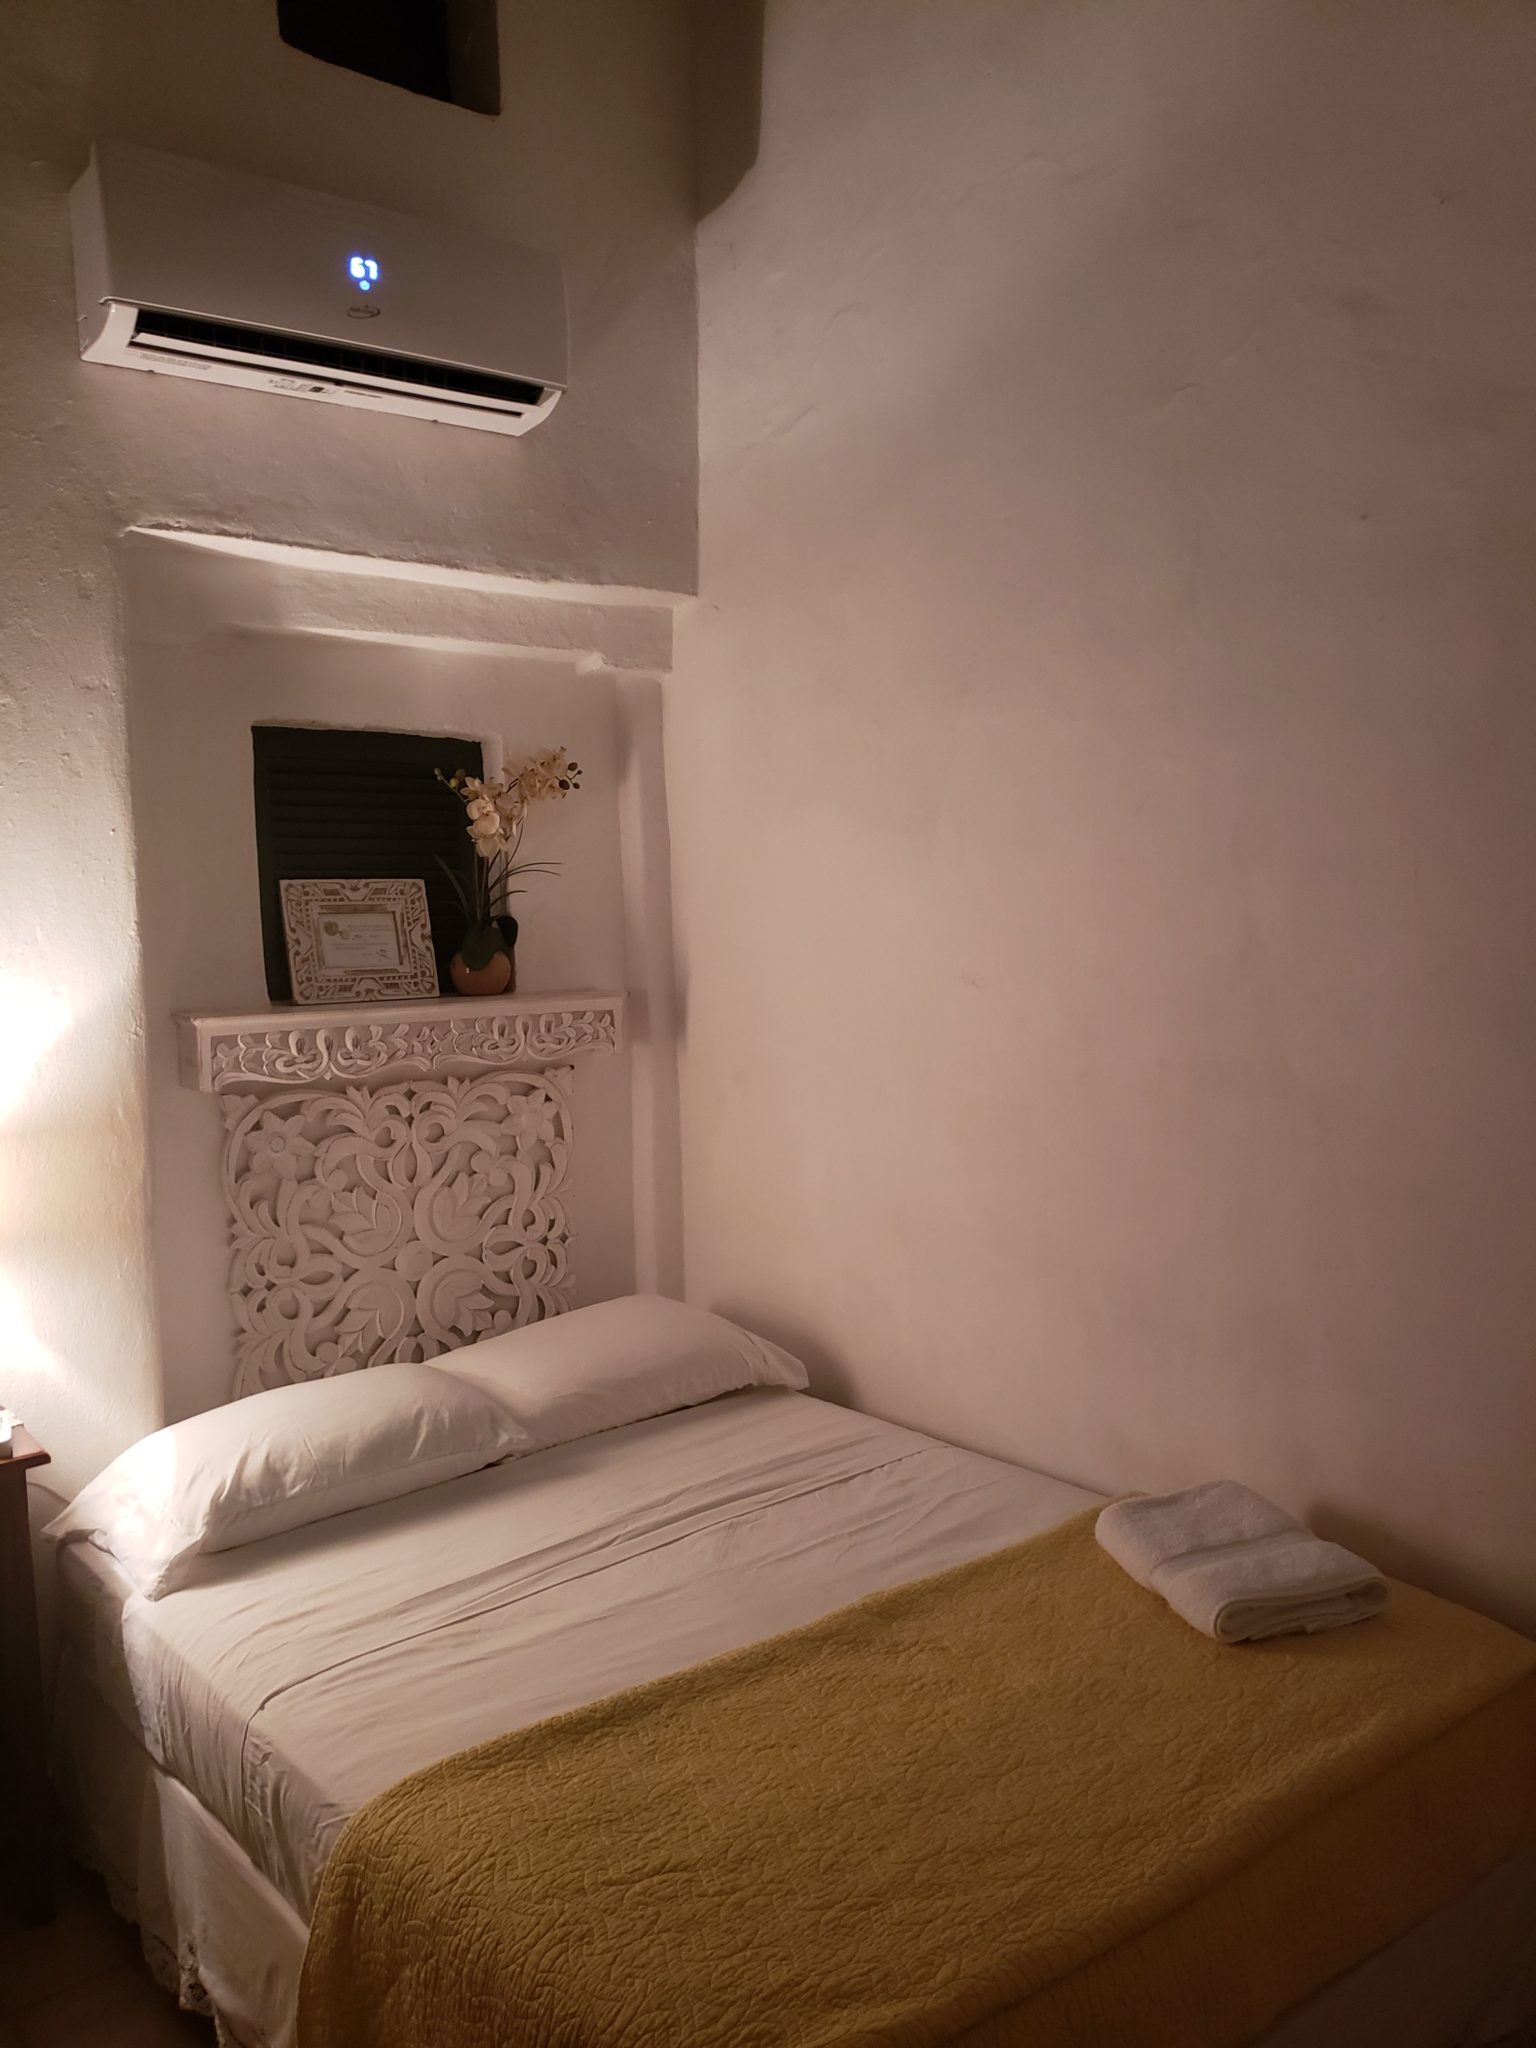 a bed with a air conditioner above it